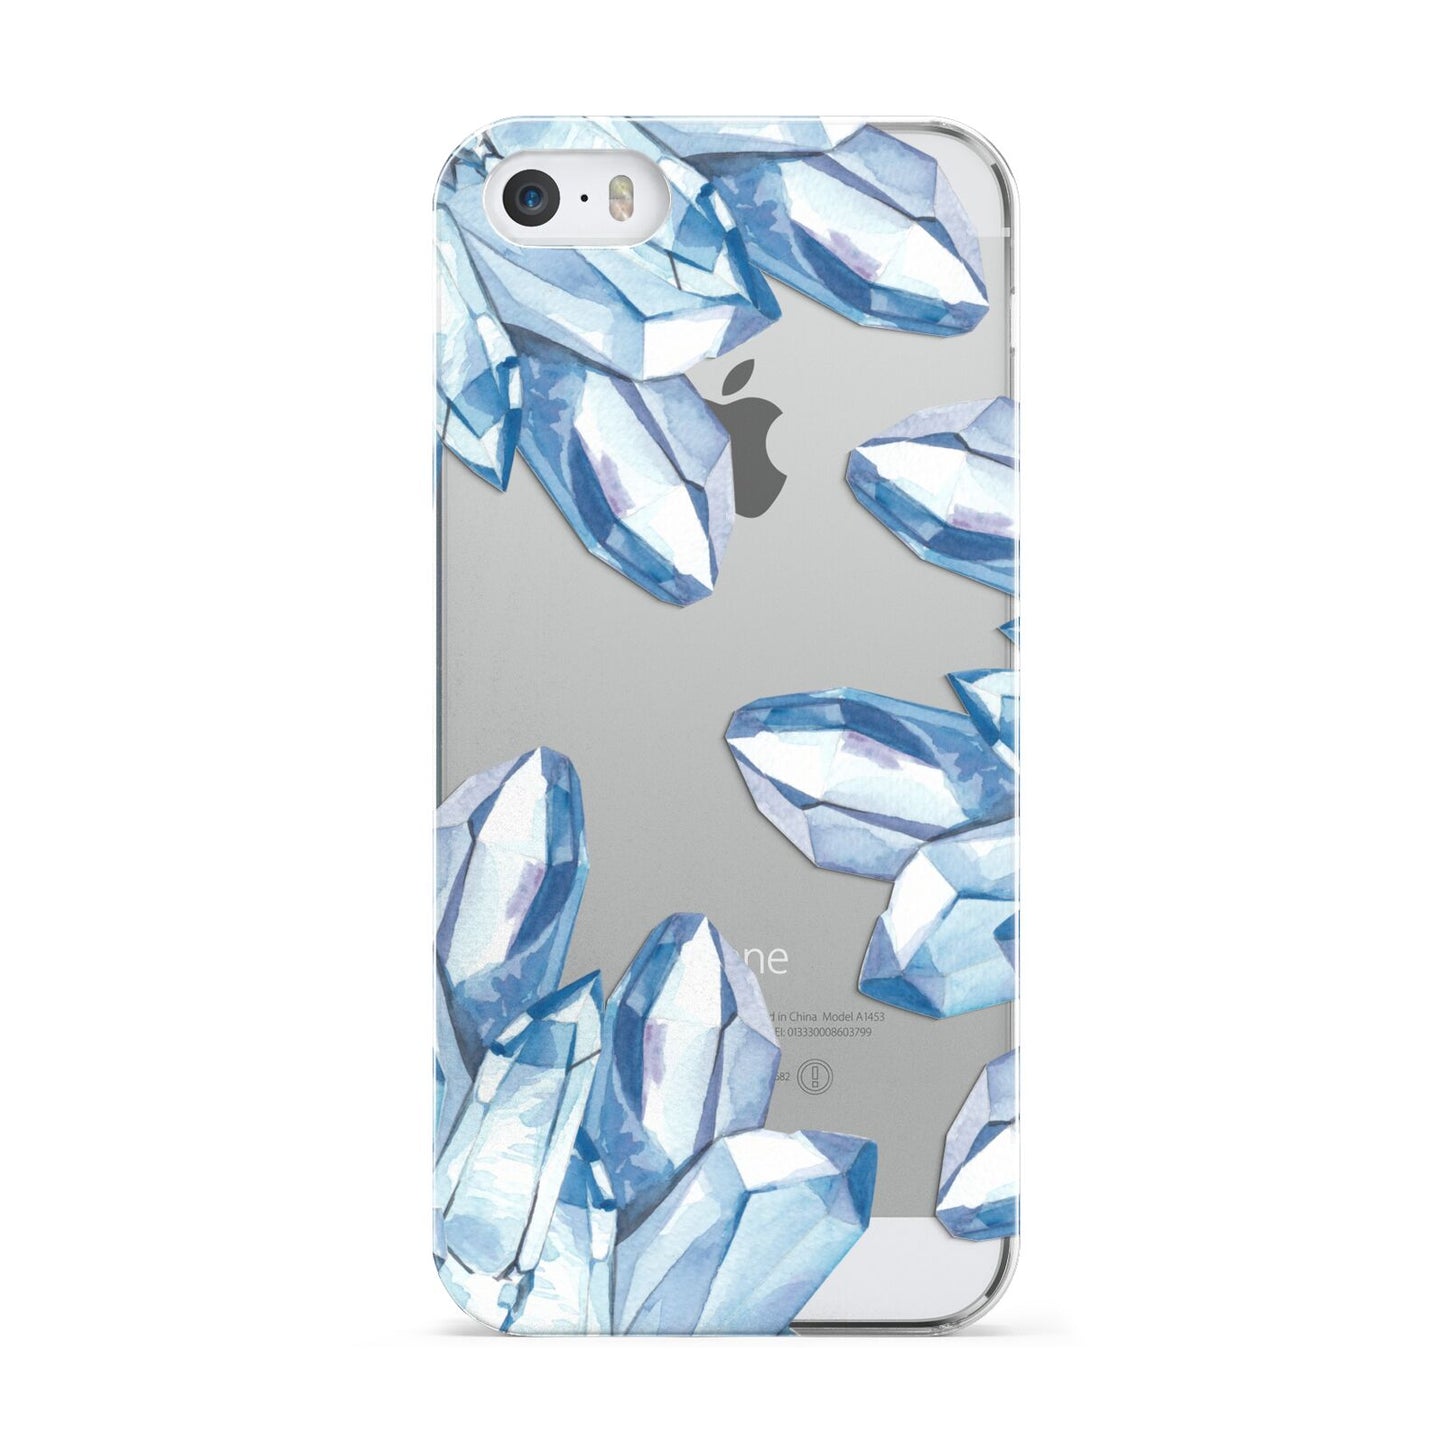 Blue Crystals Apple iPhone 5 Case